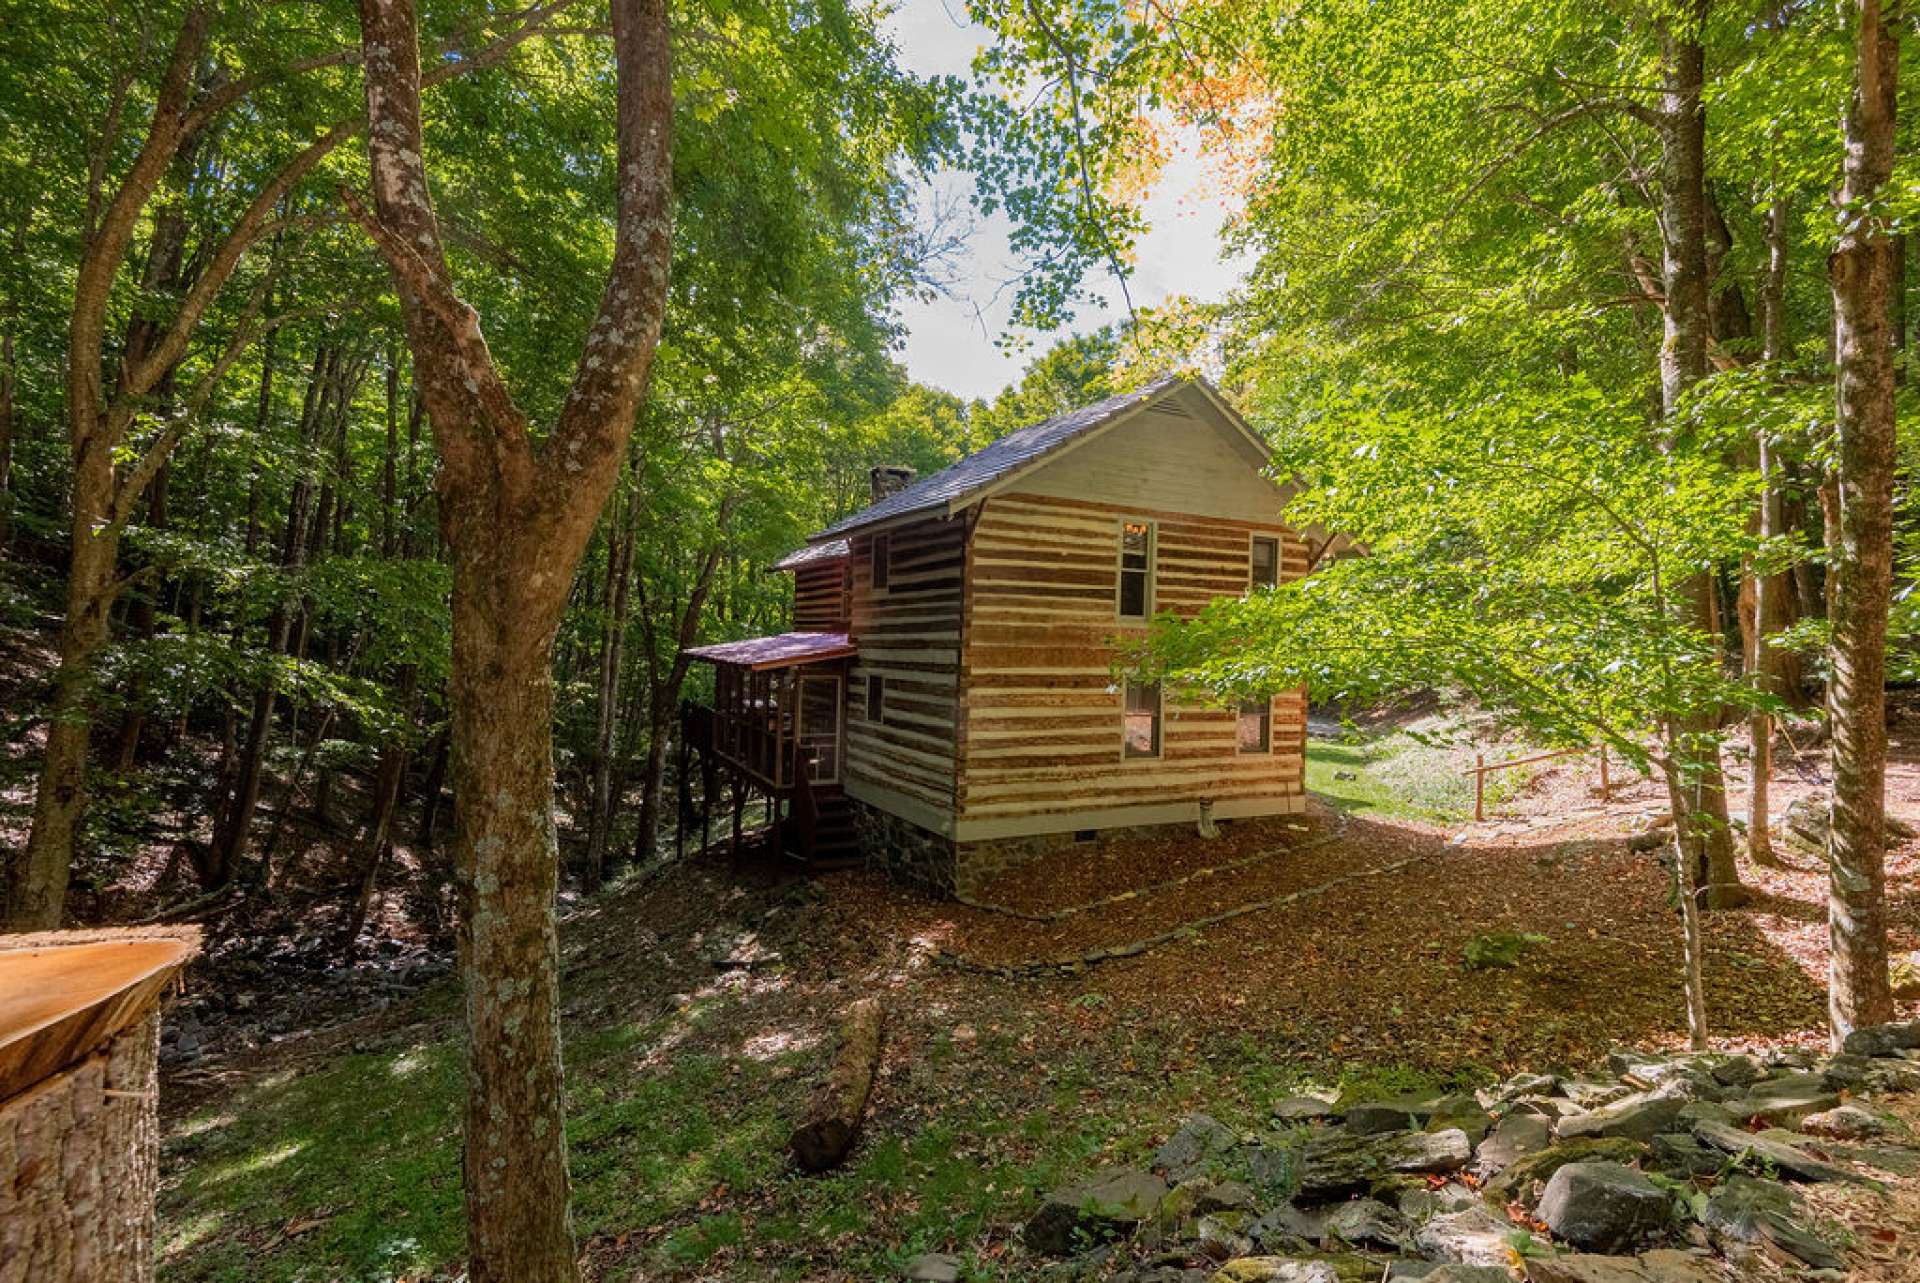 Spend your day enjoying mountain activities with this low maintenance setting.